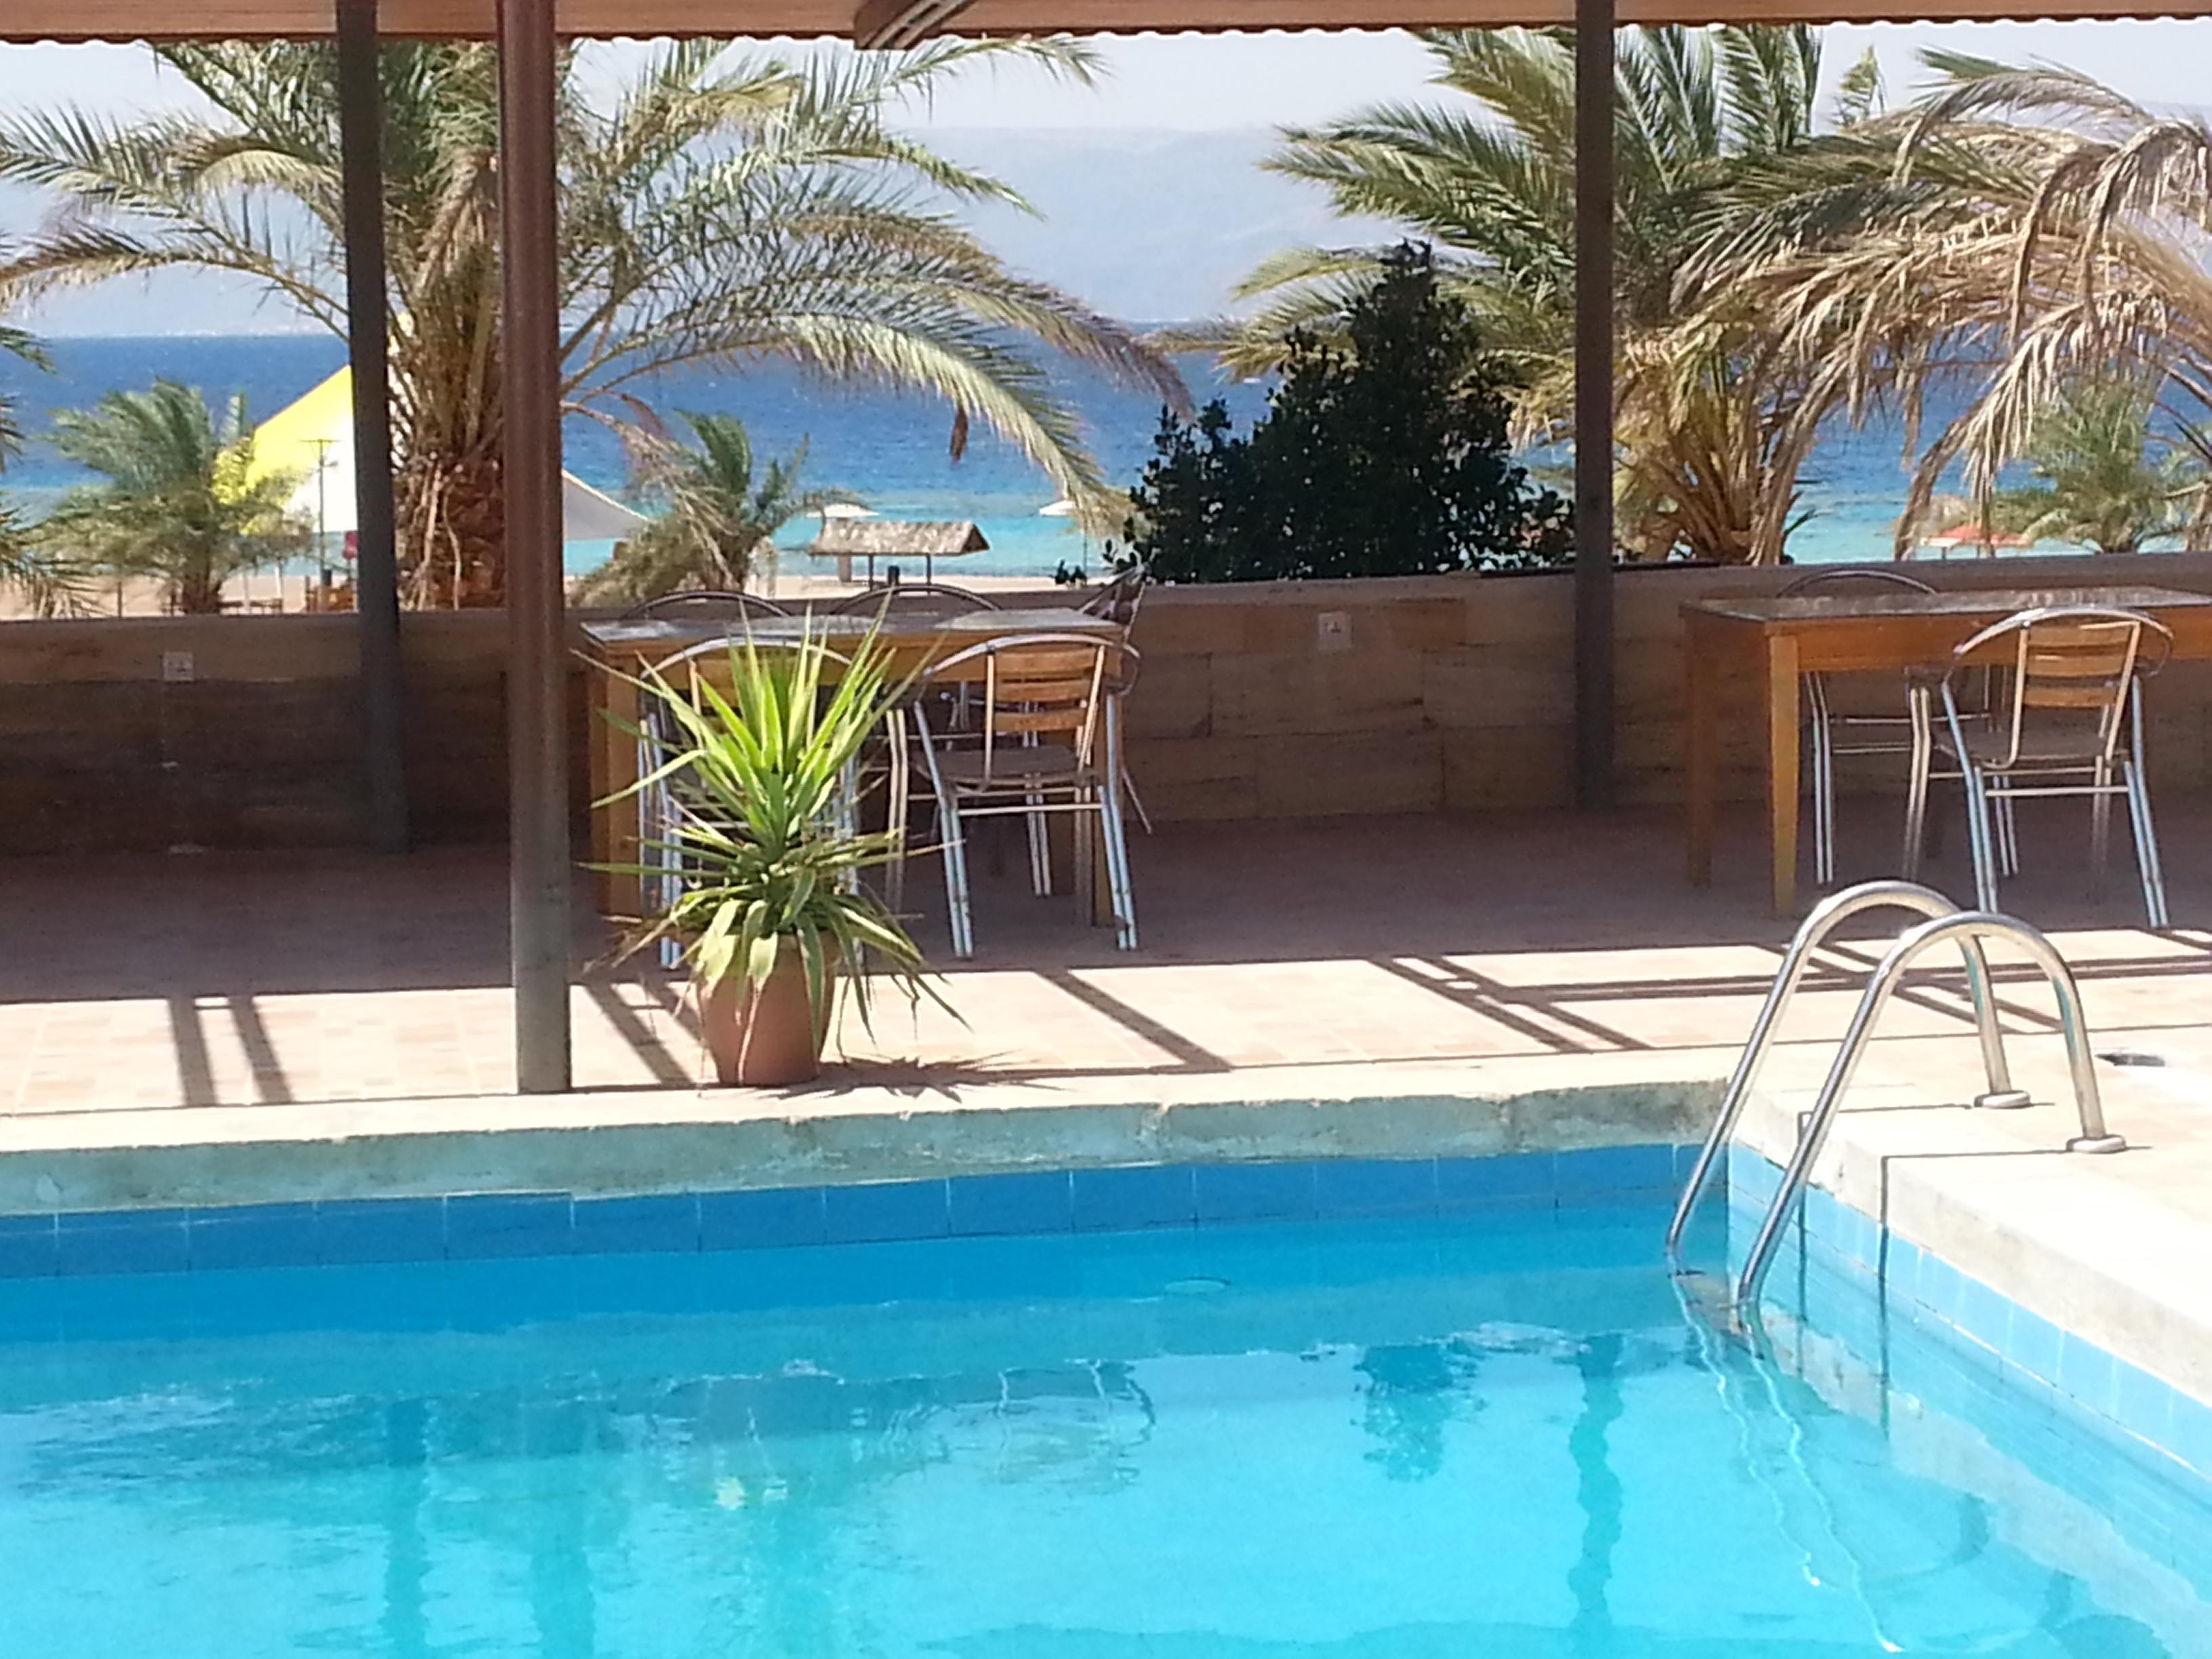 Darna Village Beach Hotel Aqaba FAQ 2016, What facilities are there in Darna Village Beach Hotel Aqaba 2016, What Languages Spoken are Supported in Darna Village Beach Hotel Aqaba 2016, Which payment cards are accepted in Darna Village Beach Hotel Aqaba , Aqaba Darna Village Beach Hotel room facilities and services Q&A 2016, Aqaba Darna Village Beach Hotel online booking services 2016, Aqaba Darna Village Beach Hotel address 2016, Aqaba Darna Village Beach Hotel telephone number 2016,Aqaba Darna Village Beach Hotel map 2016, Aqaba Darna Village Beach Hotel traffic guide 2016, how to go Aqaba Darna Village Beach Hotel, Aqaba Darna Village Beach Hotel booking online 2016, Aqaba Darna Village Beach Hotel room types 2016.